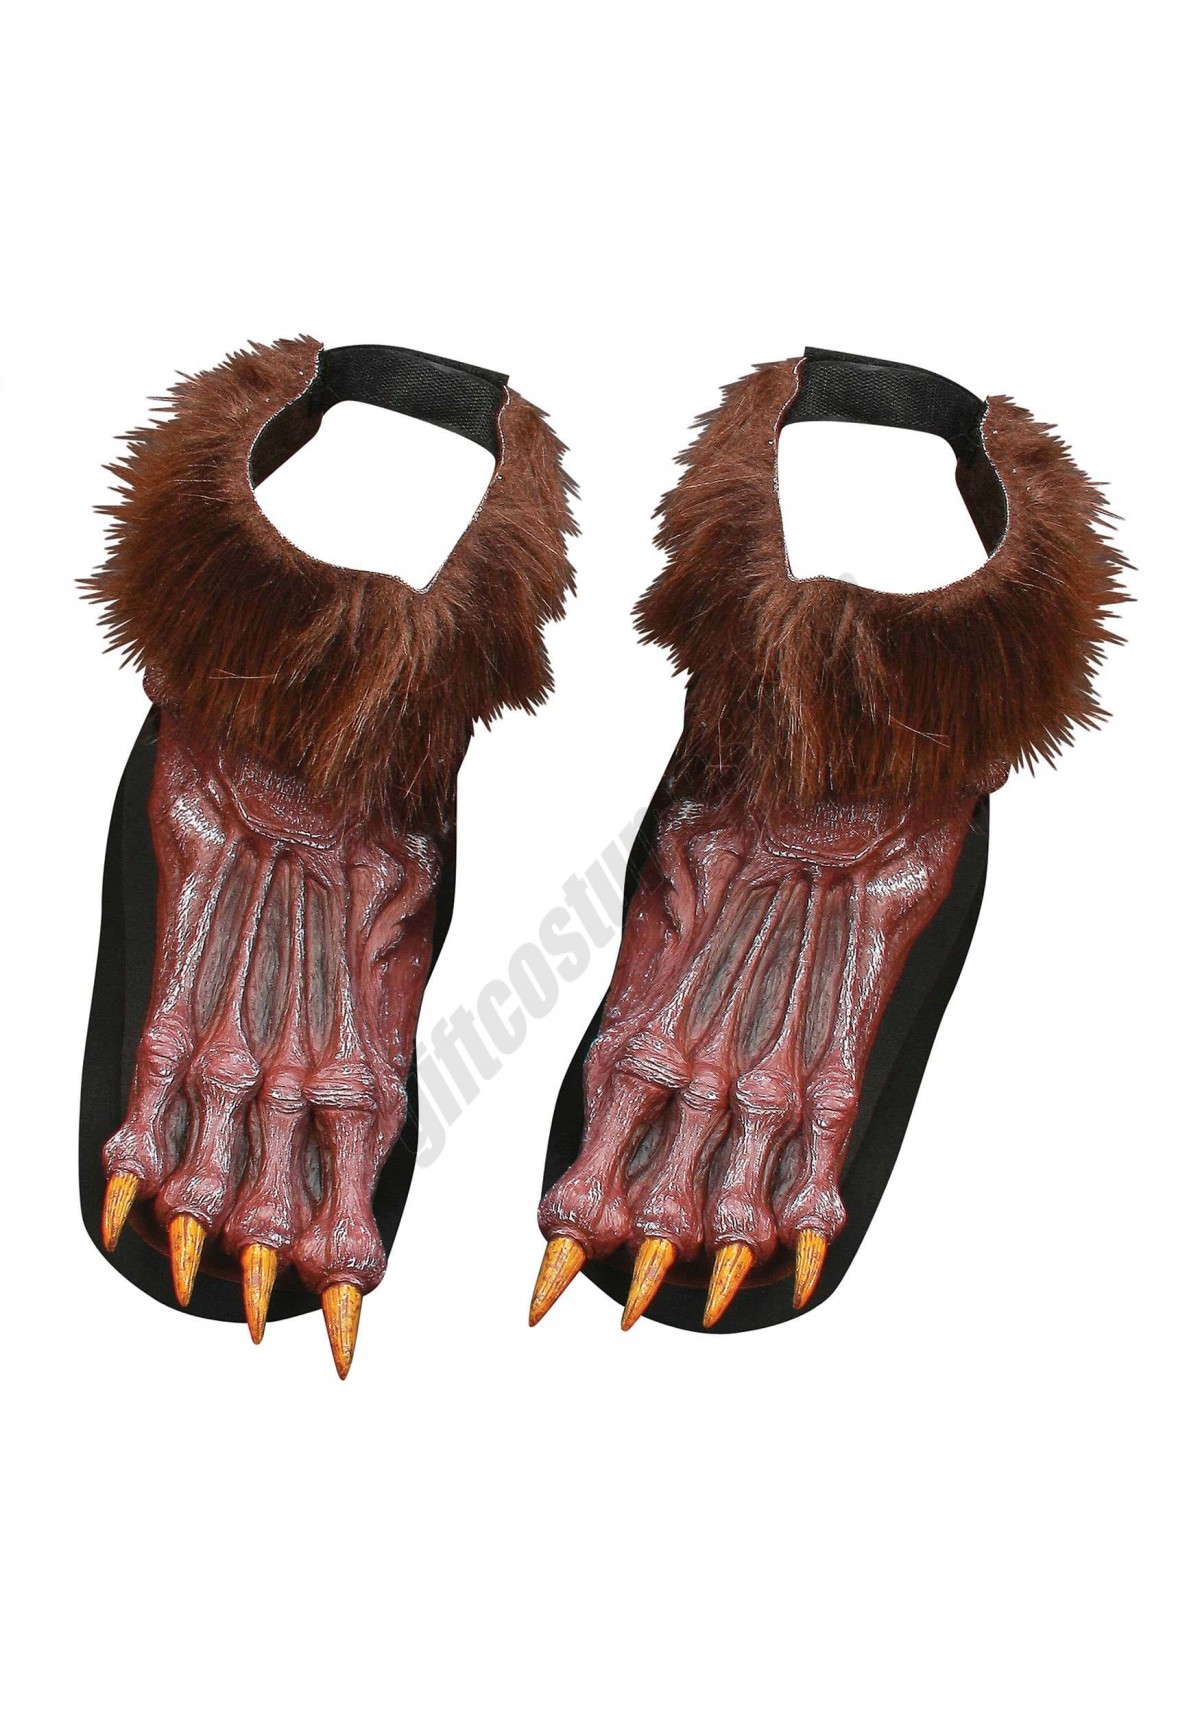 Brown Werewolf Shoe Covers Promotions - -0